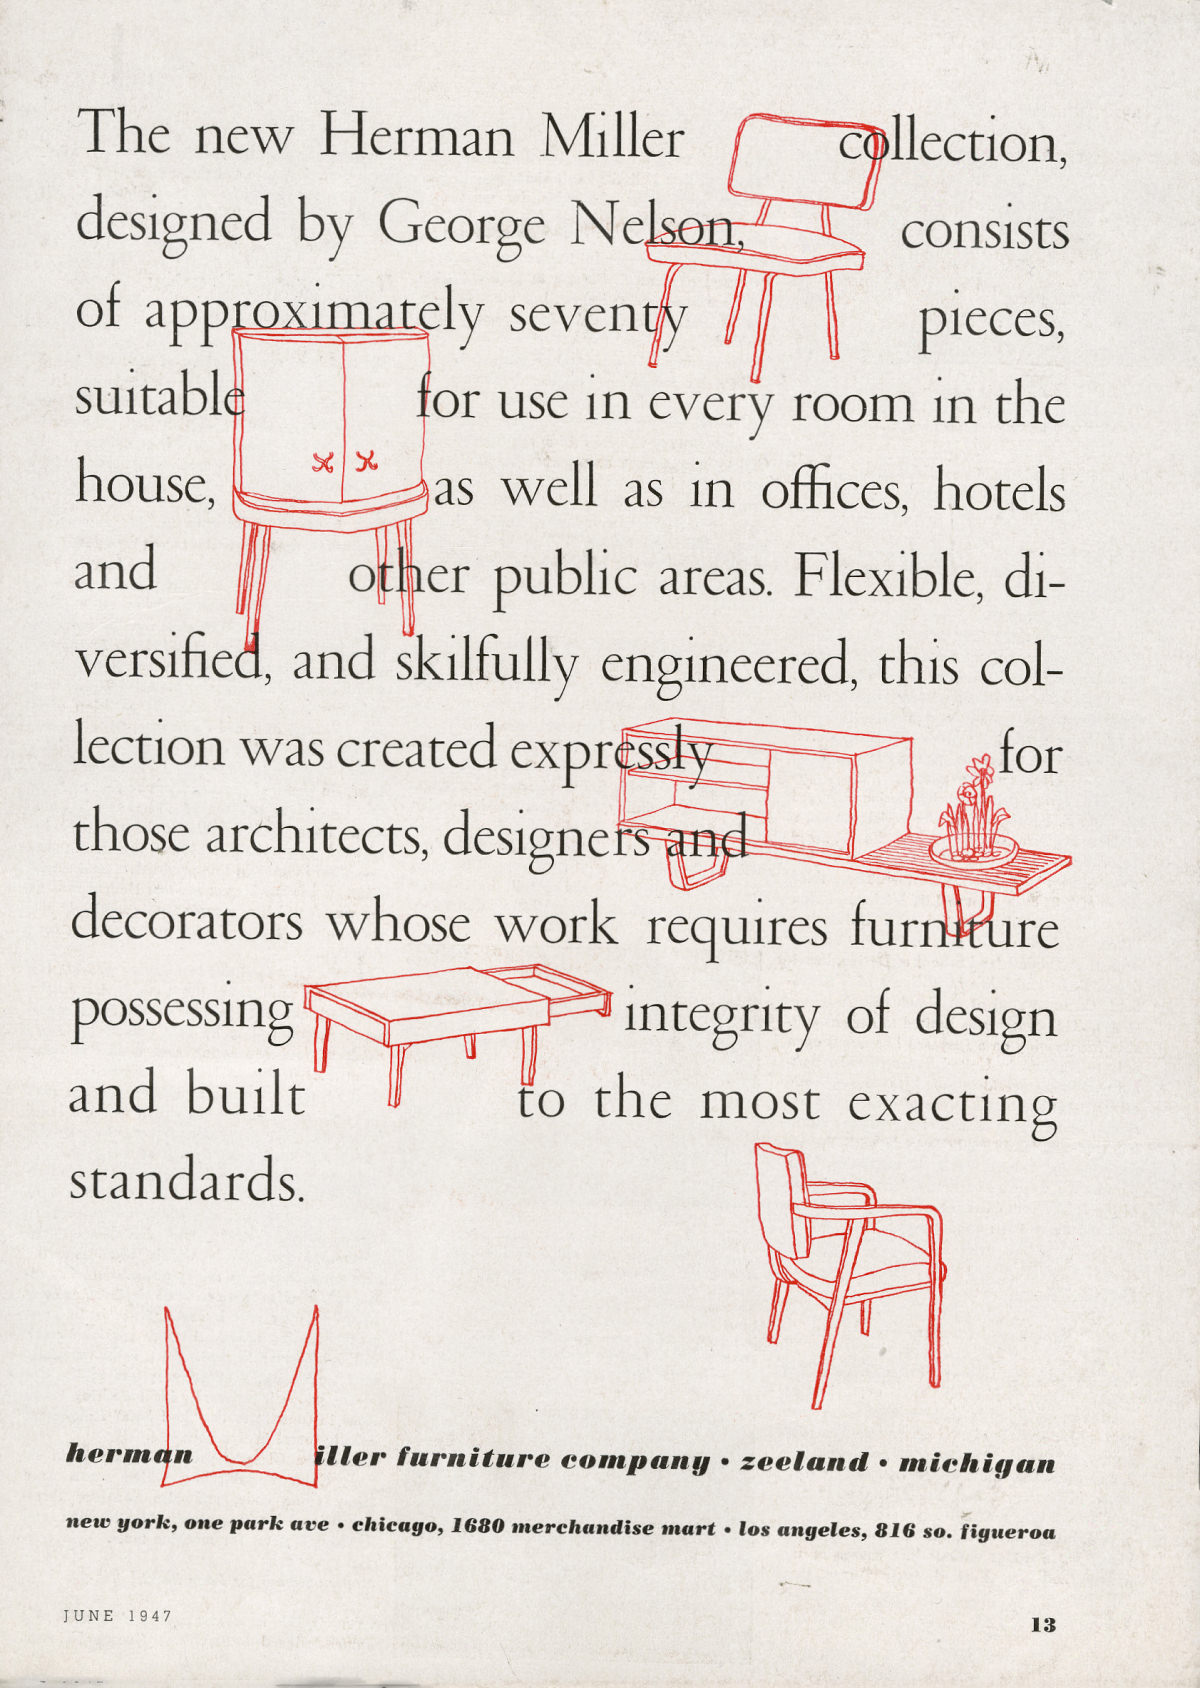 Illustrations of furniture pieces, including items from the Basic Cabinet Series, are interwoven within promotional text describing George Nelson’s first collection for Herman Miller.